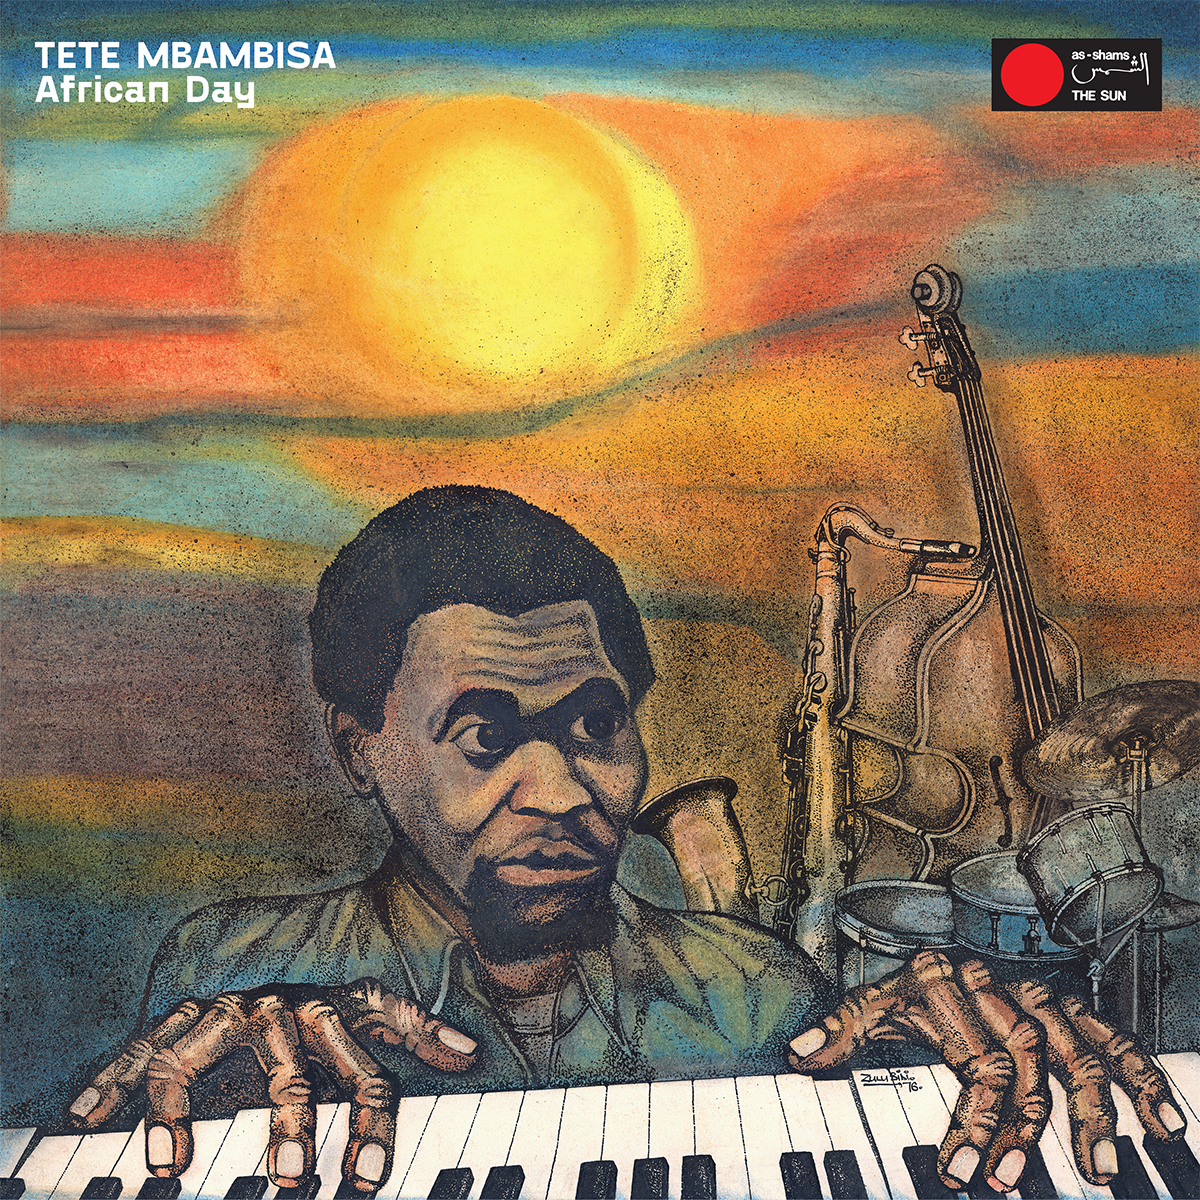 African Day - Tete Mbambisa